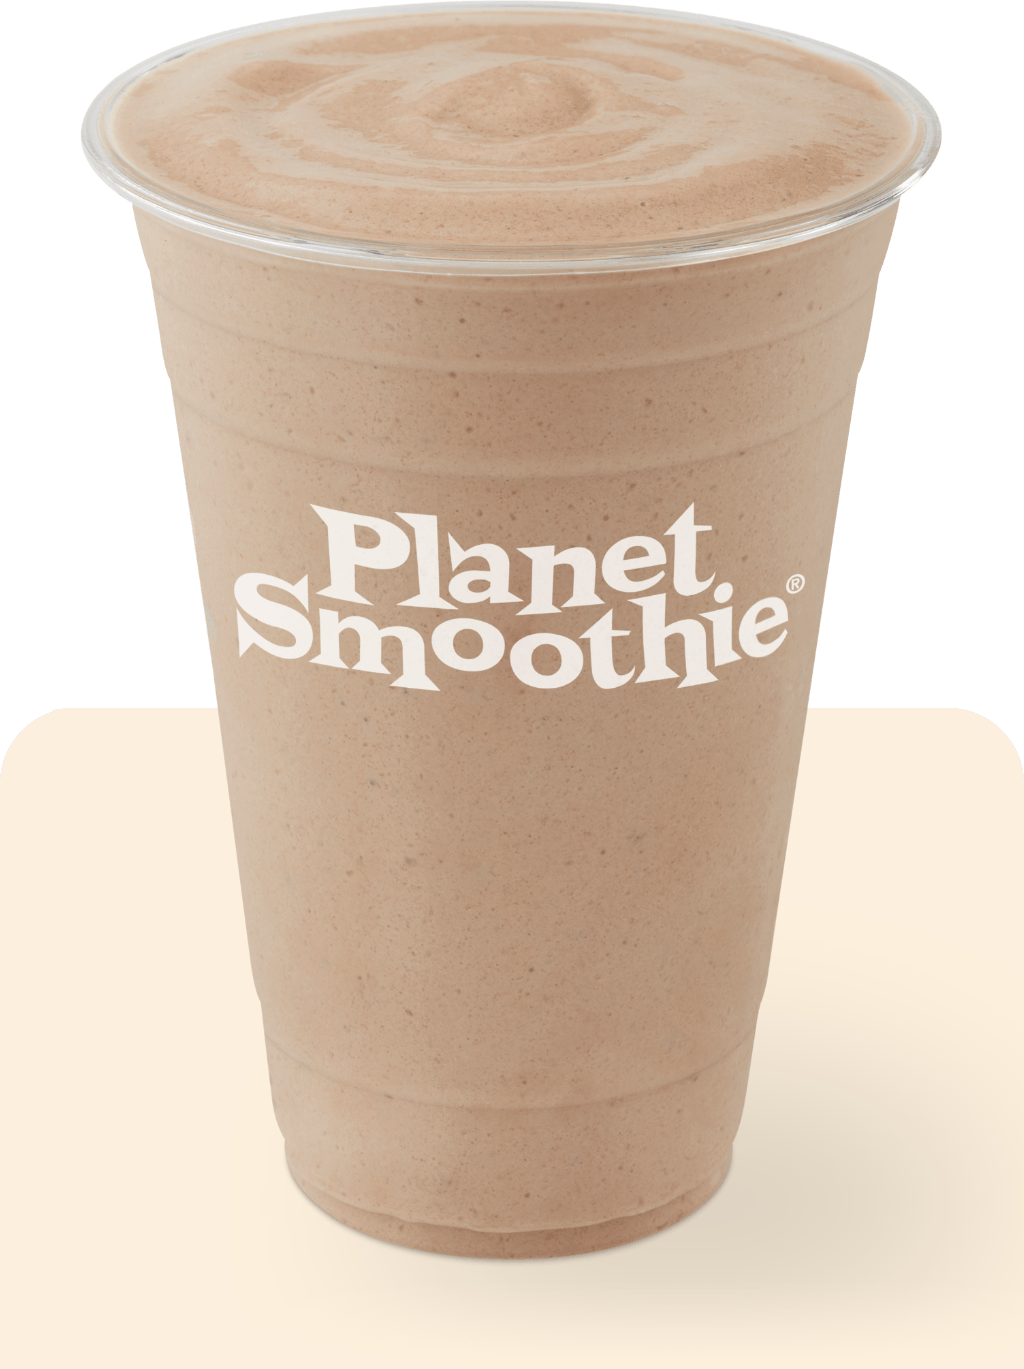 Smoothie Restaurant Store I Combine Planet Smoothie Gift Card No Value 